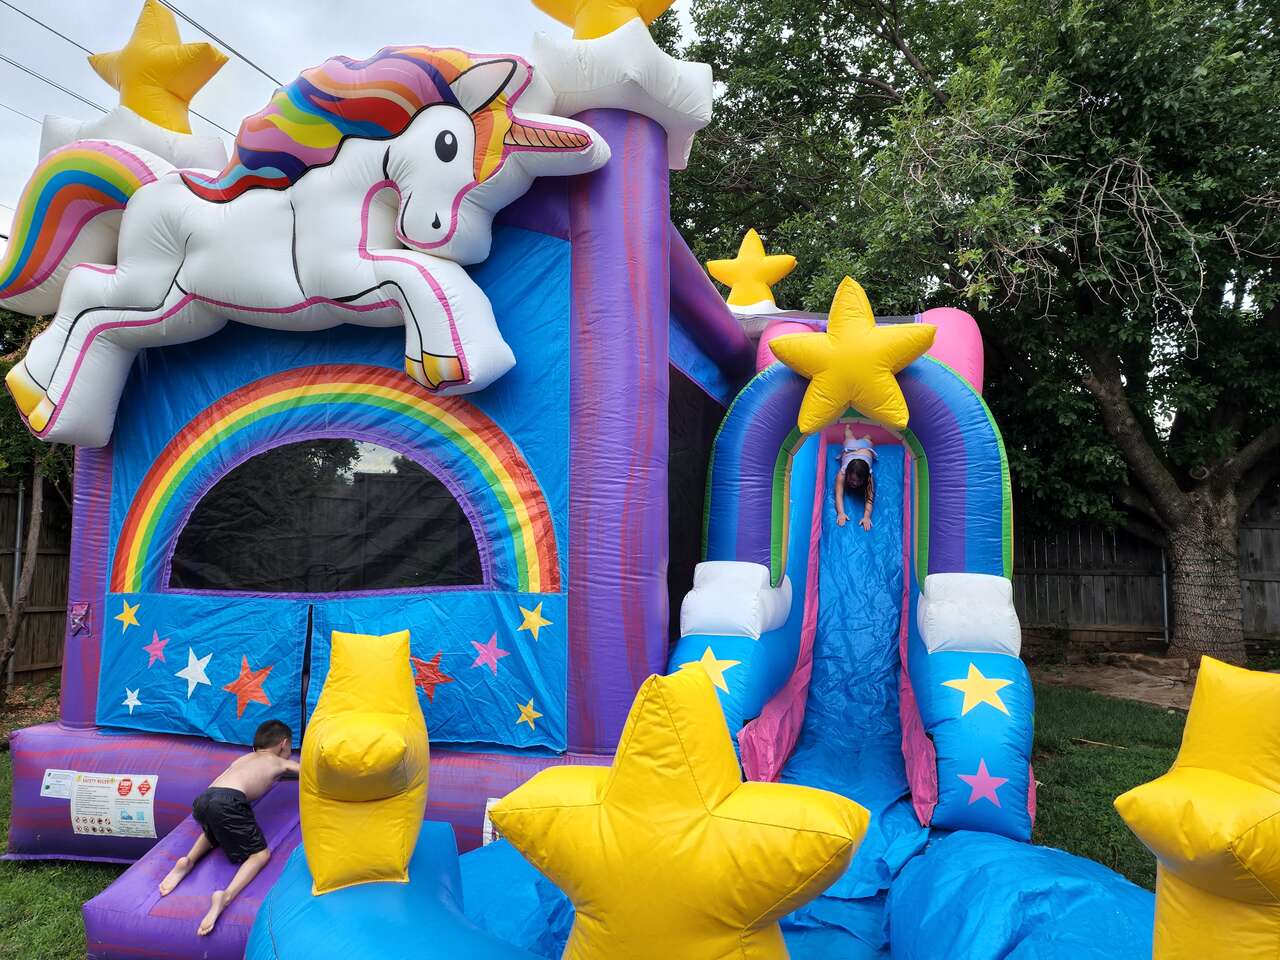 Party Rentals OKC Uses for Fun Events Year-Round